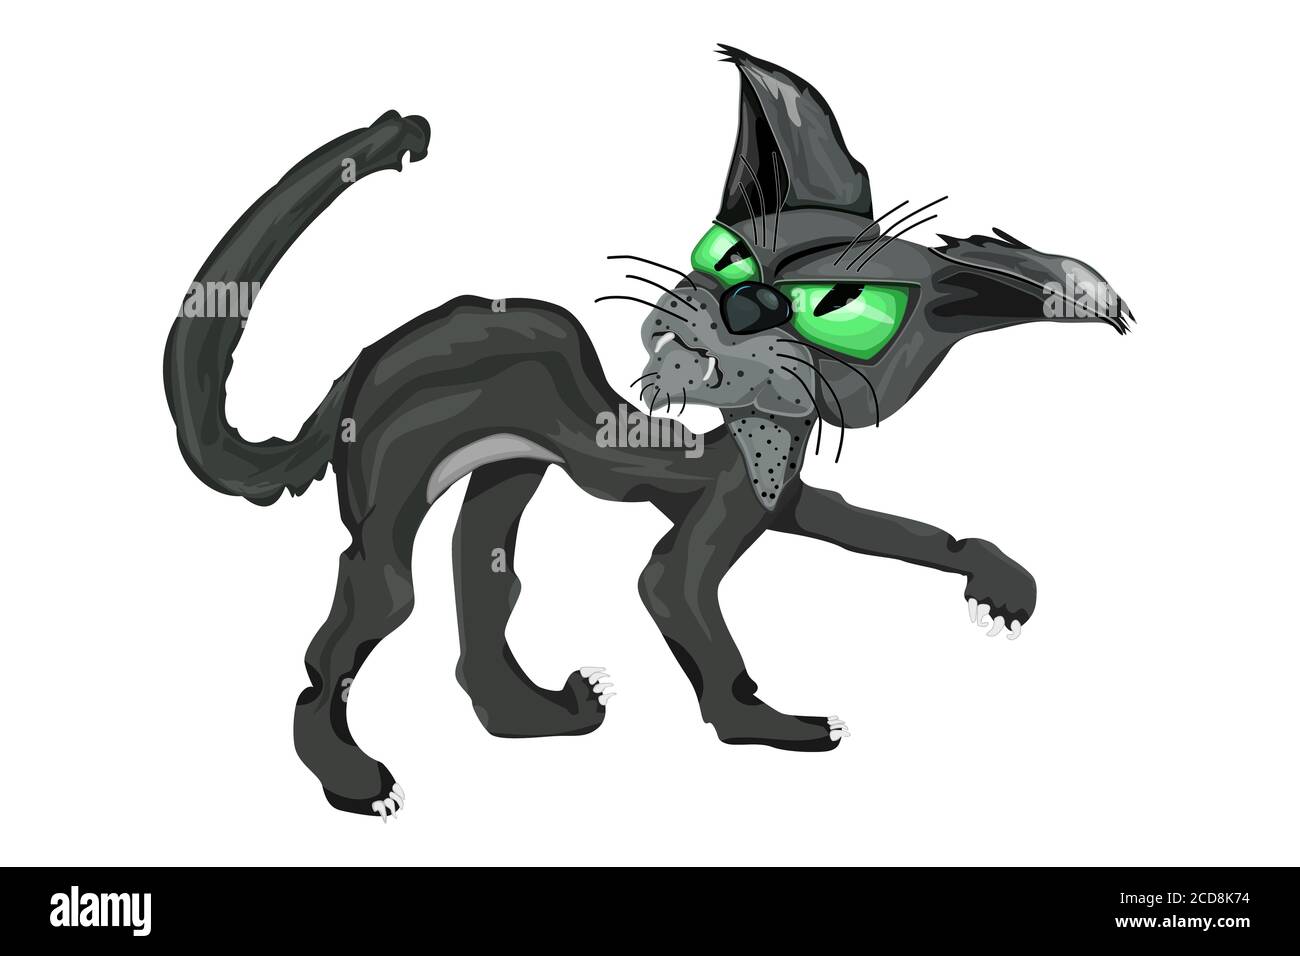 Black cat isolated on white background. Angry black cat with big green eyes. Scary Halloween black cat. Spooky animal. Stock vector illustration Stock Vector